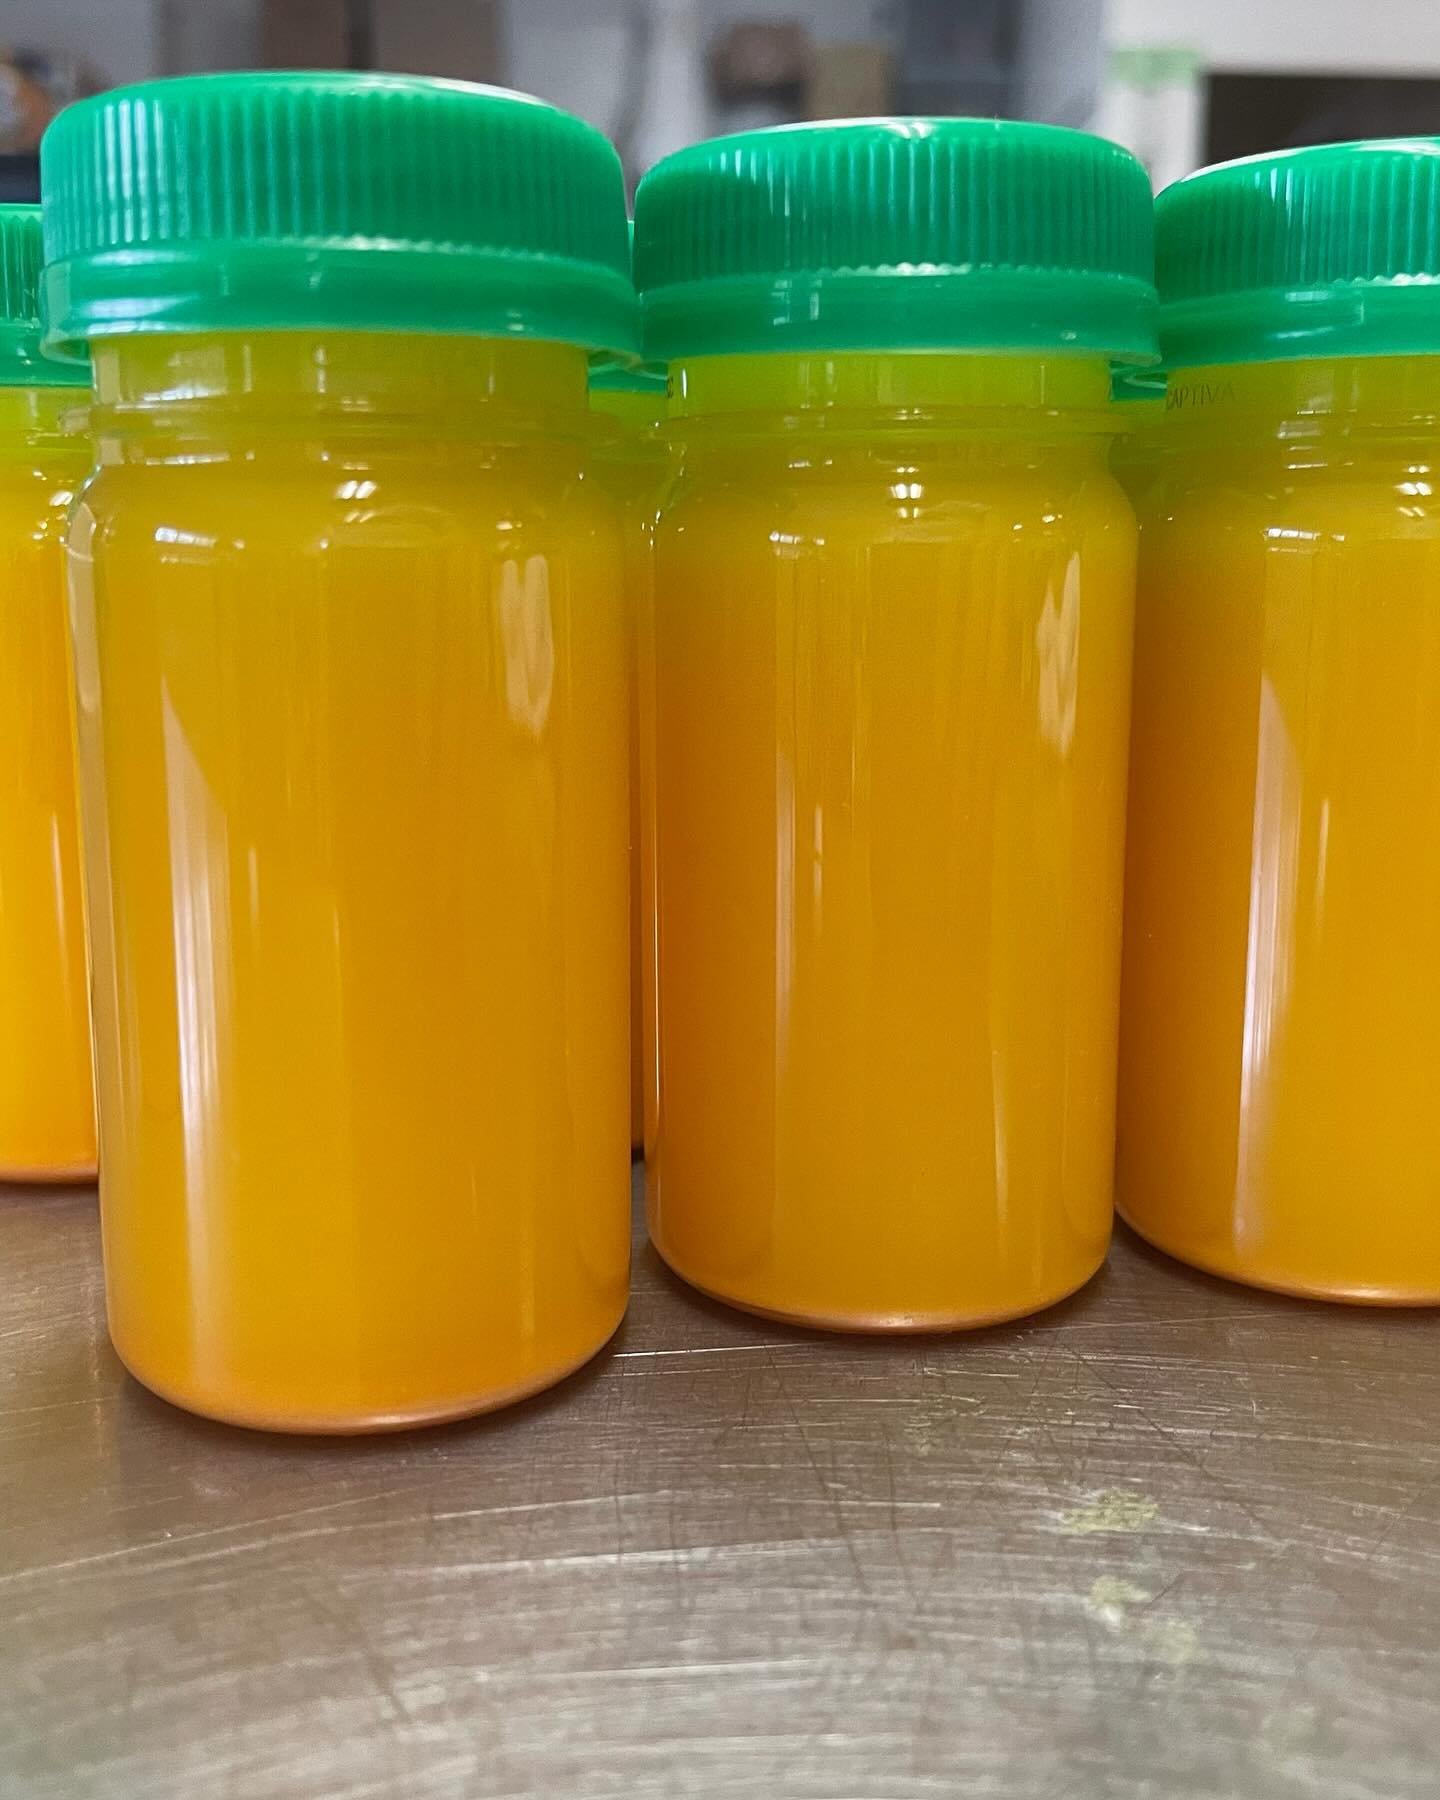 These are our 2.5-ounce juice shots (called The Shot) that we pack with orange, lemon, ginger, and turmeric! You can take them on-the-go or have one poured right at the market; great for boosting your immunity. Join us this Friday @eastashevillemarke